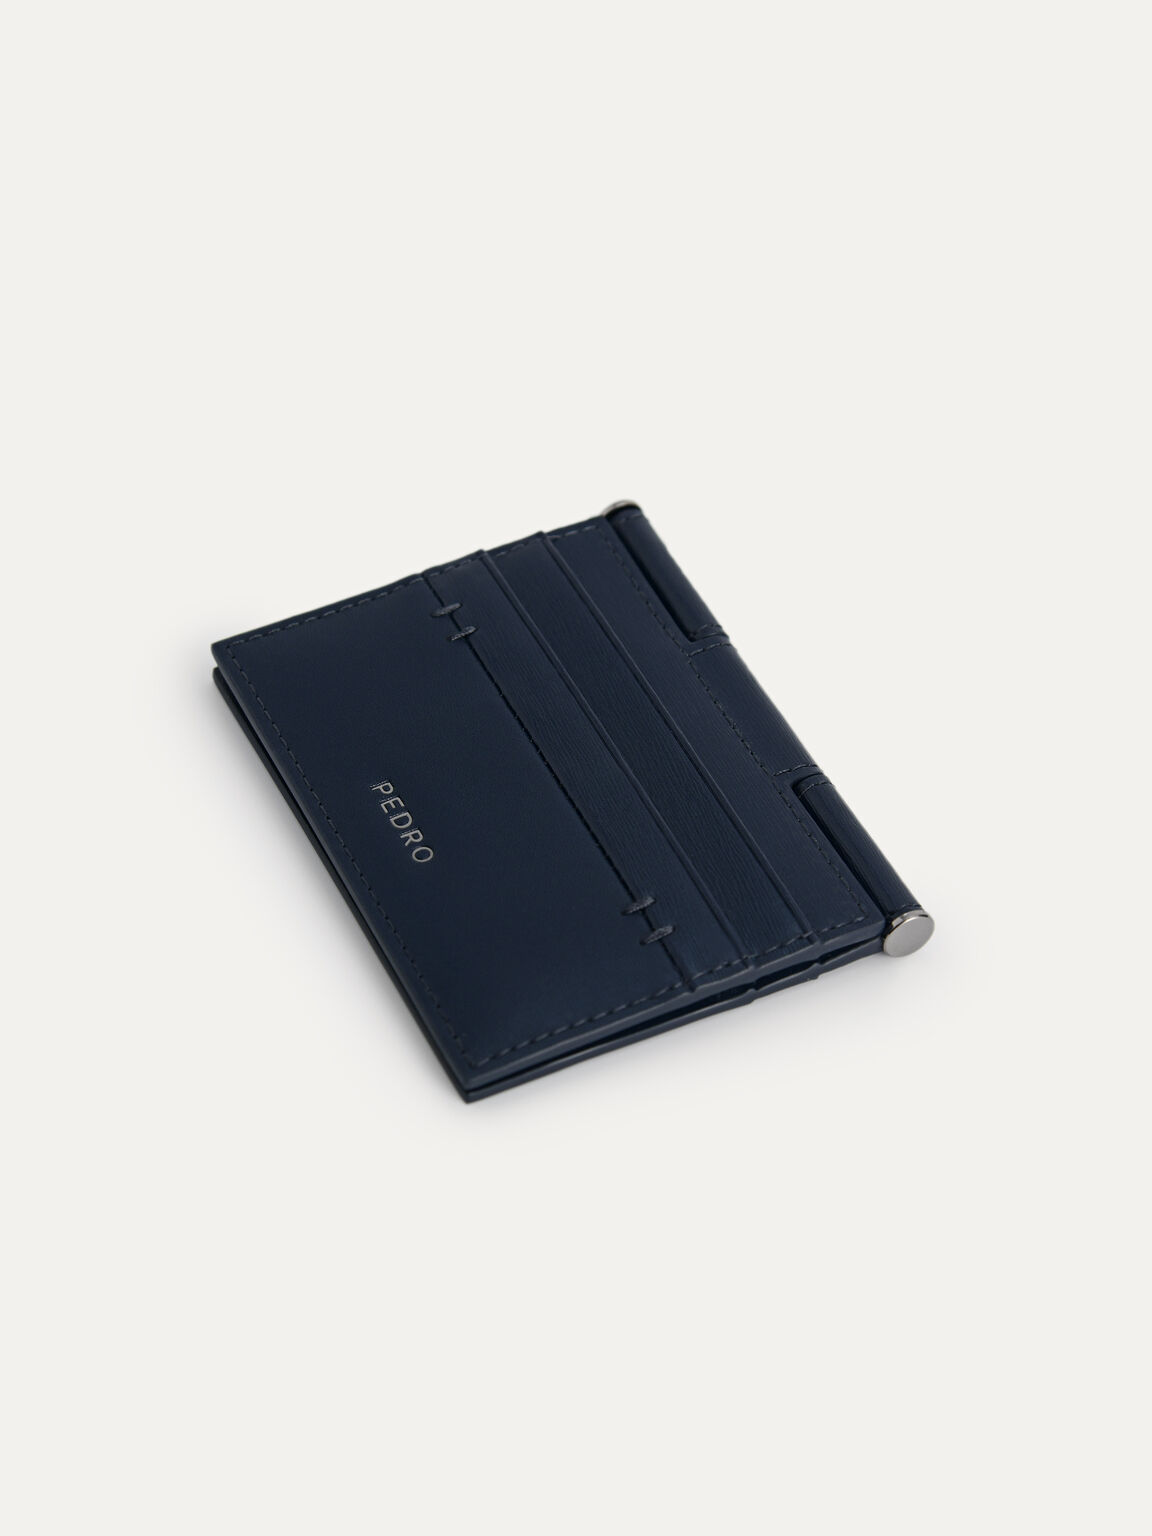 Textured Leather Flat Card Holder, Navy